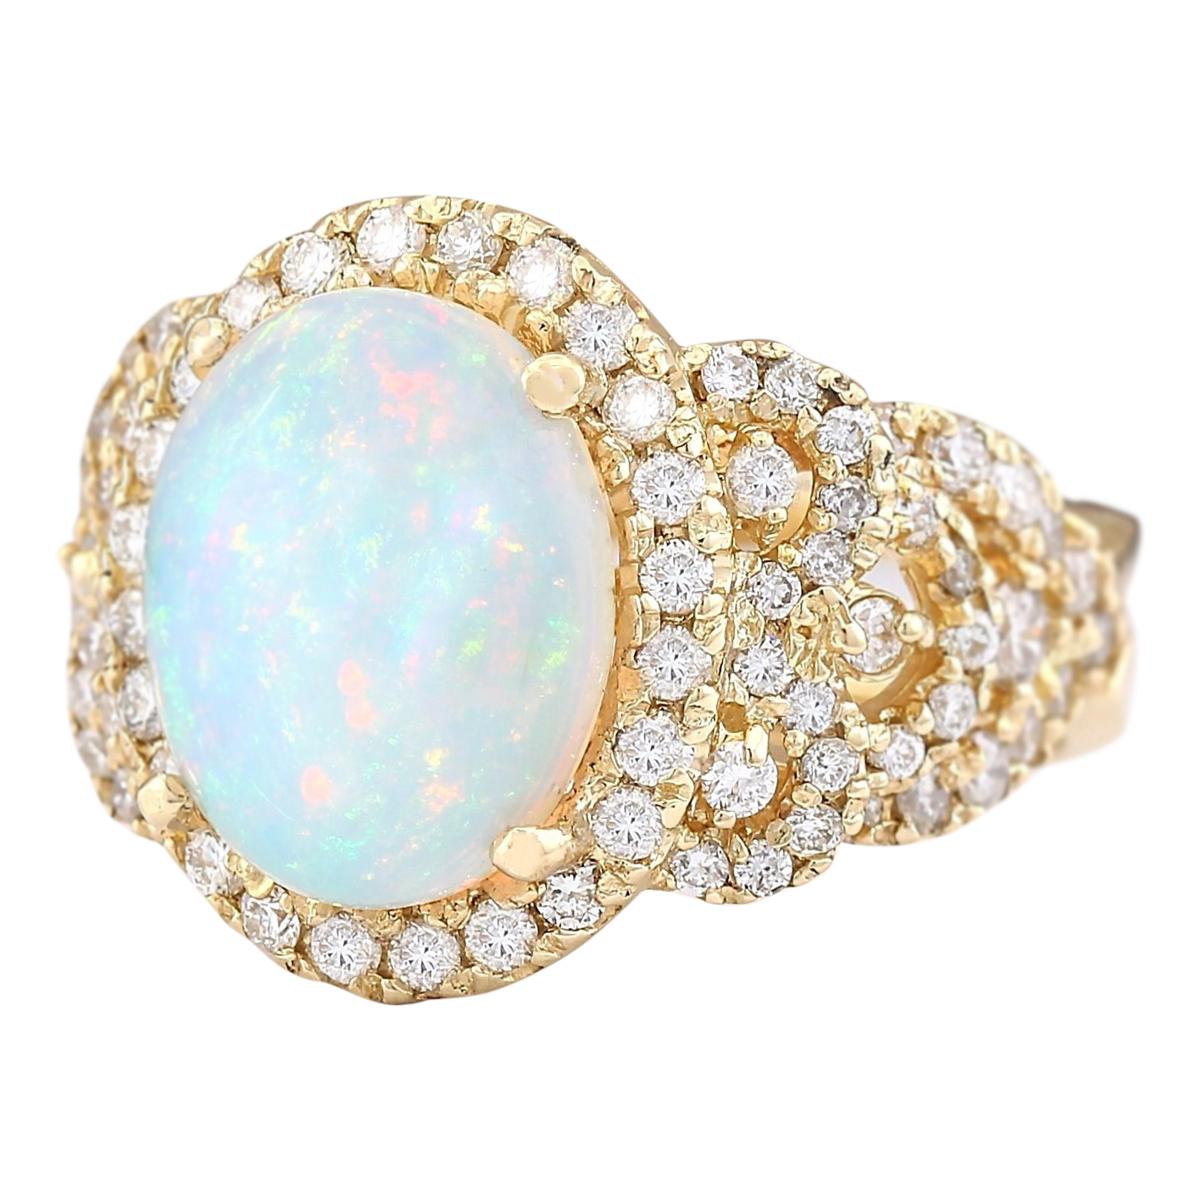 Stamped: 14K Yellow Gold
Total Ring Weight: 10.4 Grams
Opal Weight is 3.36 Carat (Measures: 14.00x10.00 mm)
Diamond Weight is 1.50 Carat
Color: F-G, Clarity: VS2-SI1
Face Measures: 17.35x14.50 mm
Sku: [703920W]